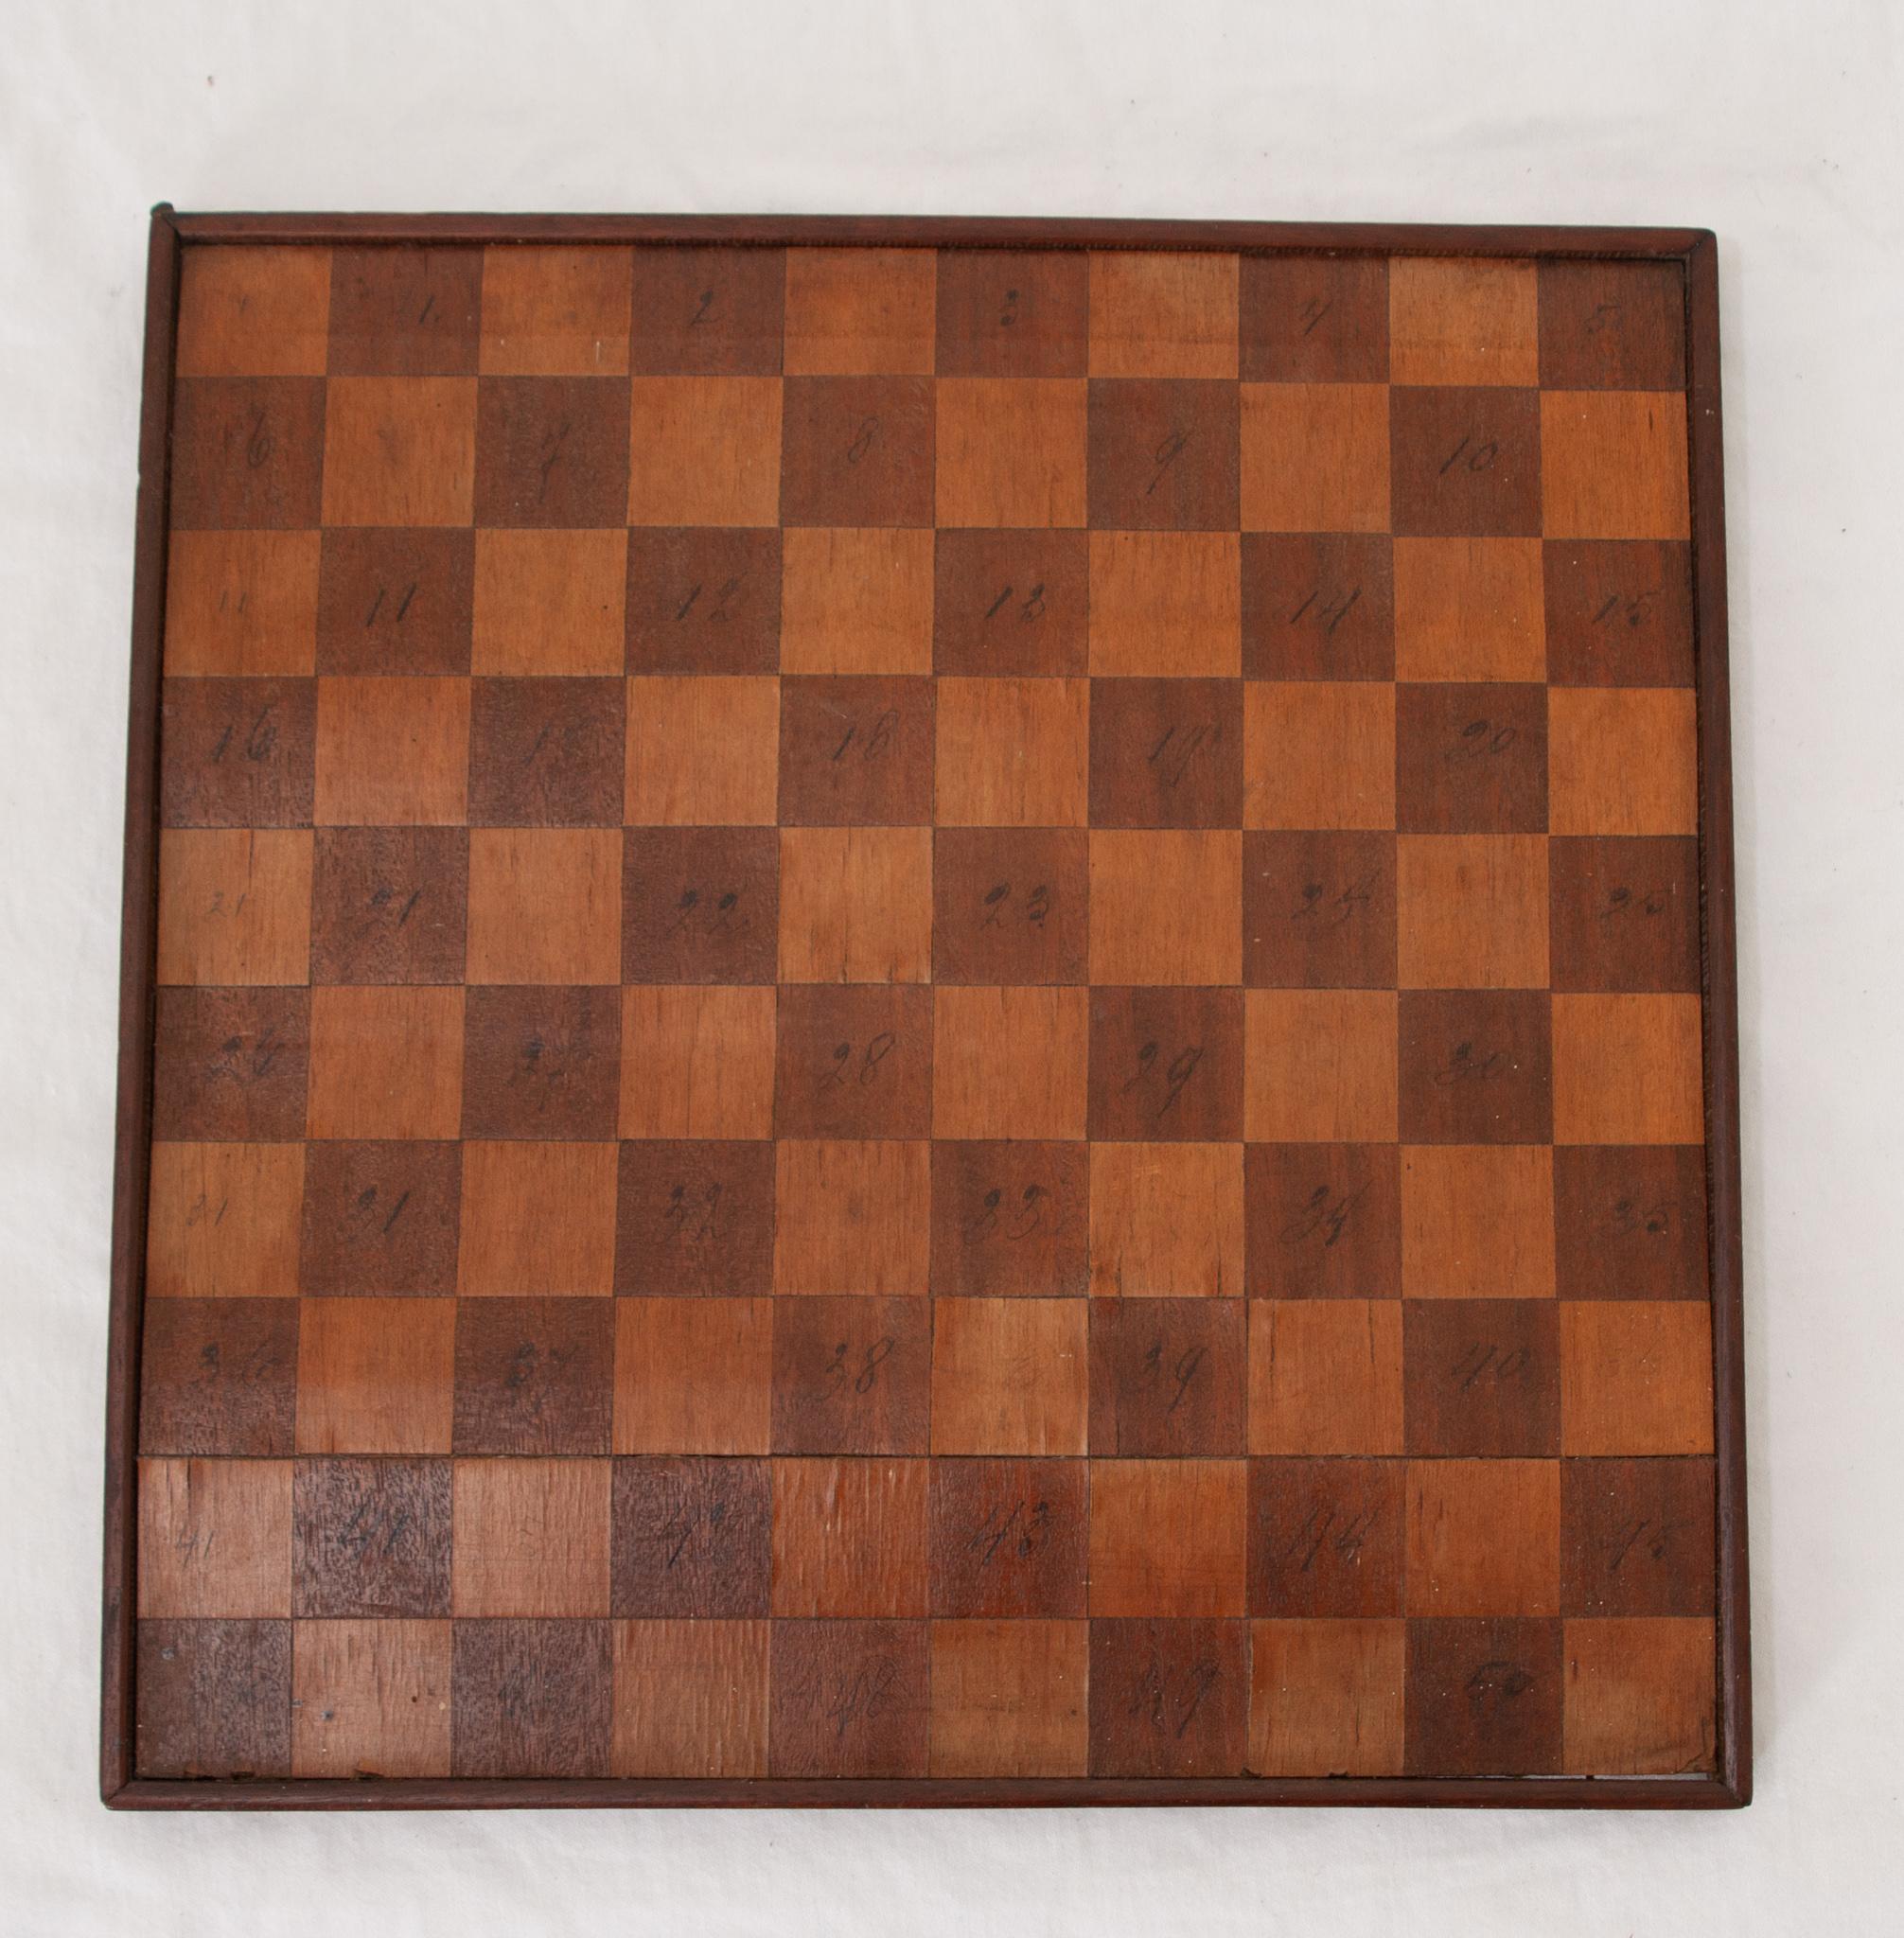 A vintage checkerboard made of alternating stained pieces of fruitwood veneer. This board has a wonderful patina and is an attractive game board that could be kept out at all times. Perfect for your home or as a gift. Be sure to view the detailed